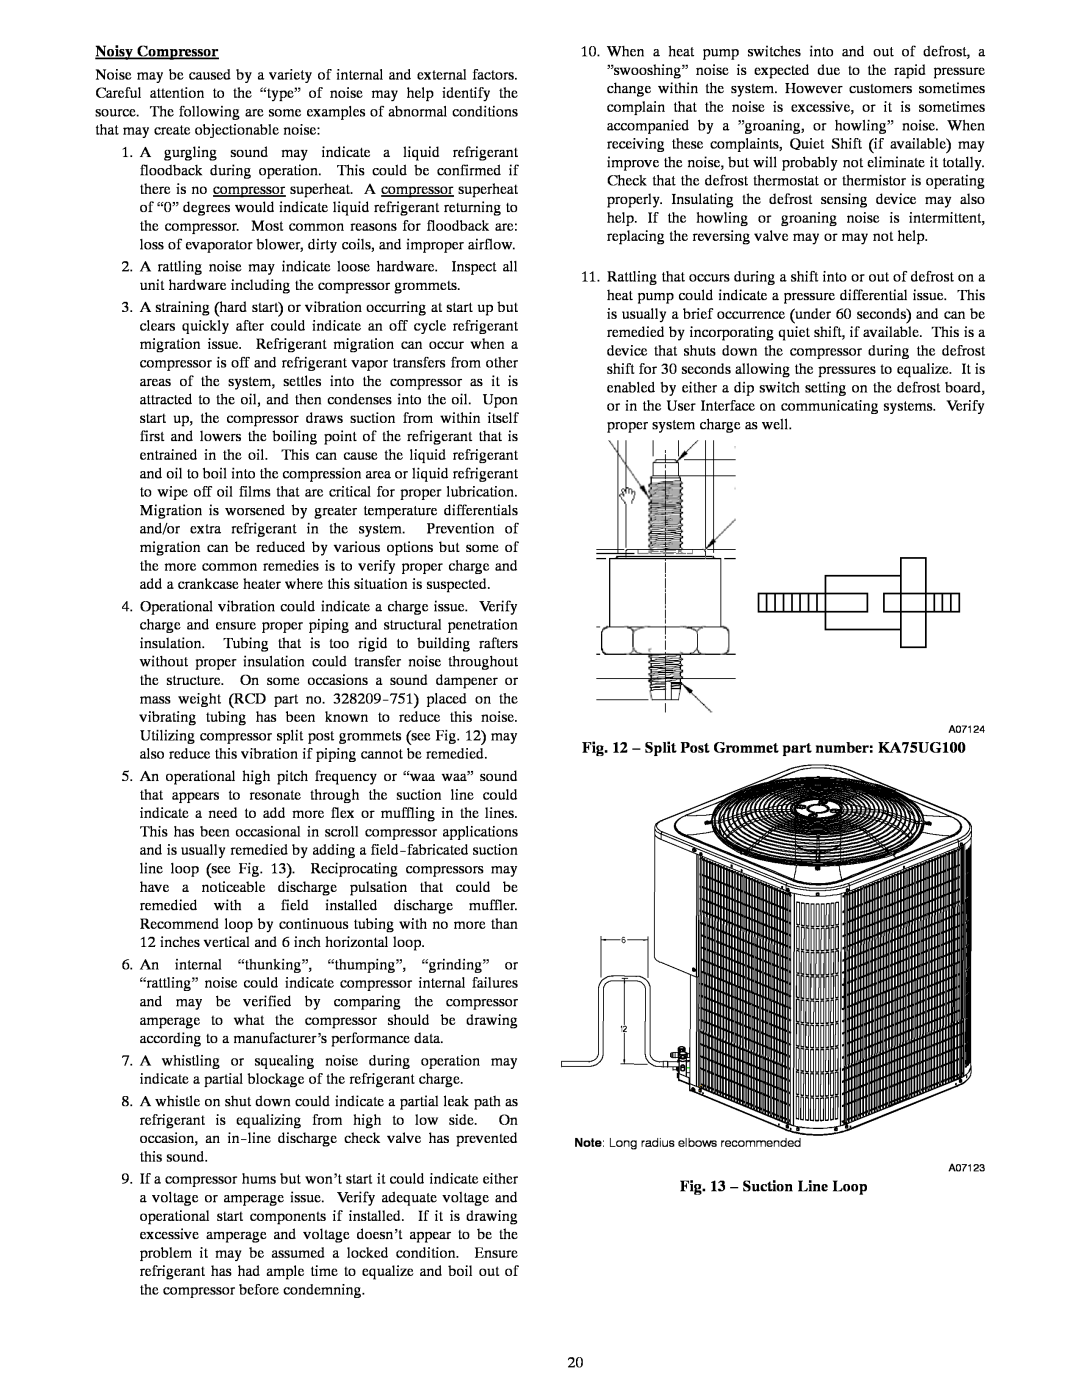 Bryant R-22 service manual Noisy Compressor, Suction Line Loop 